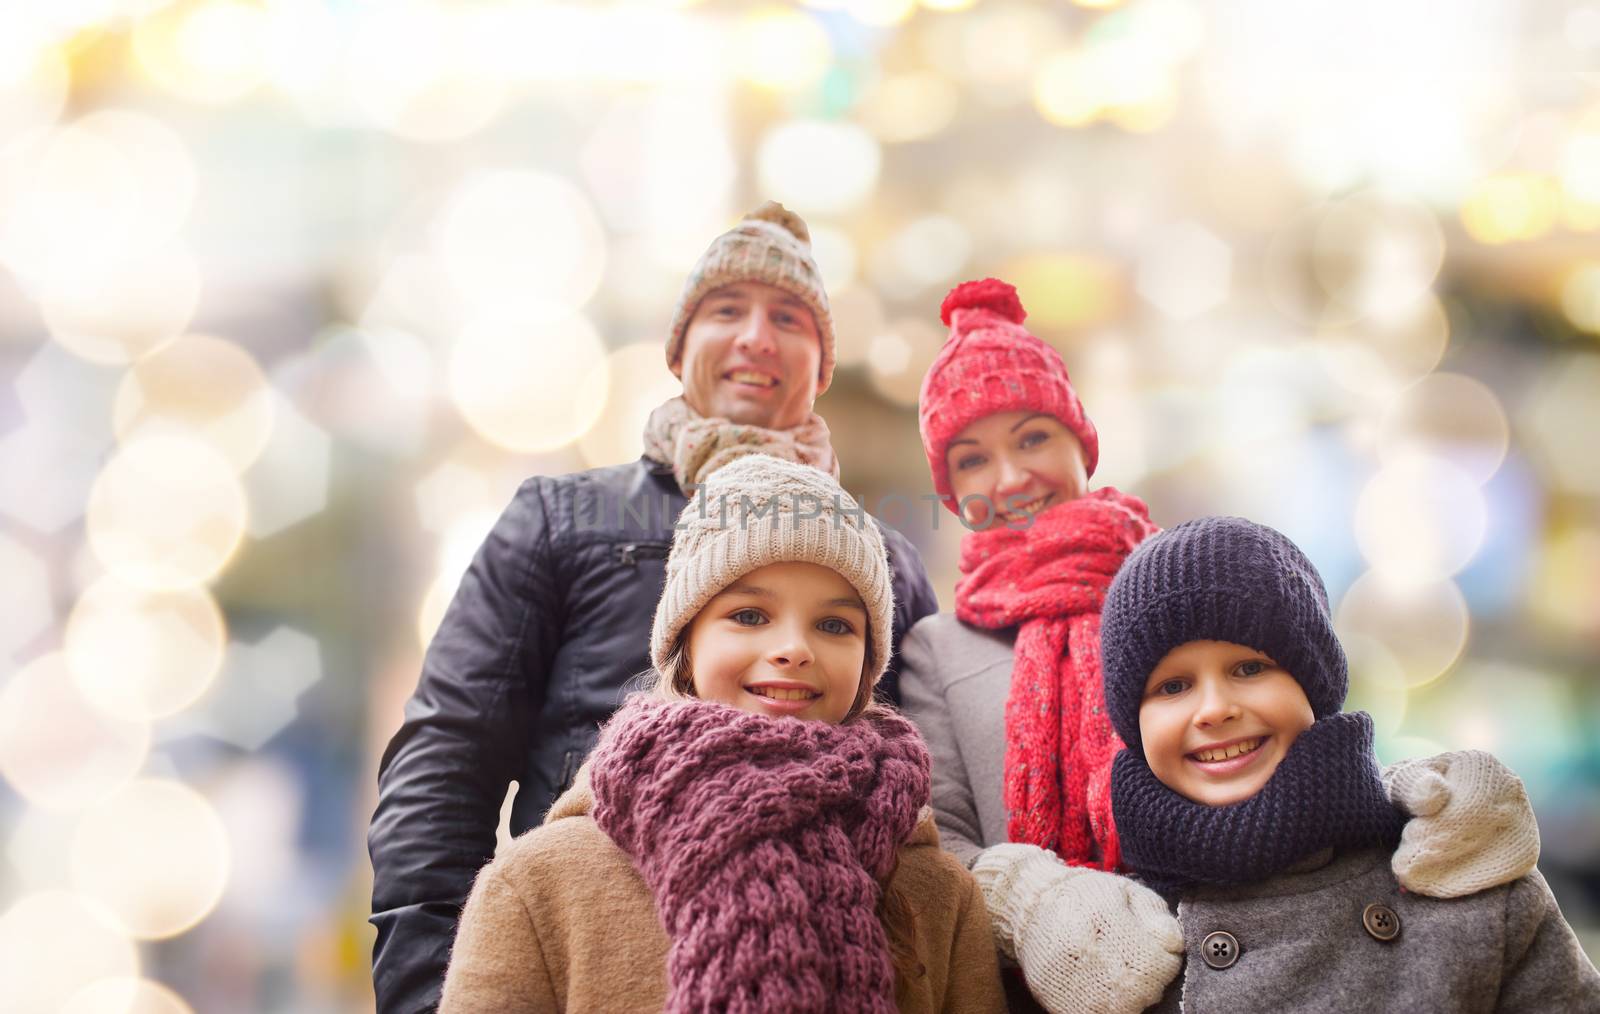 family, childhood, season, holidays and people concept - happy family in winter clothes over lights background